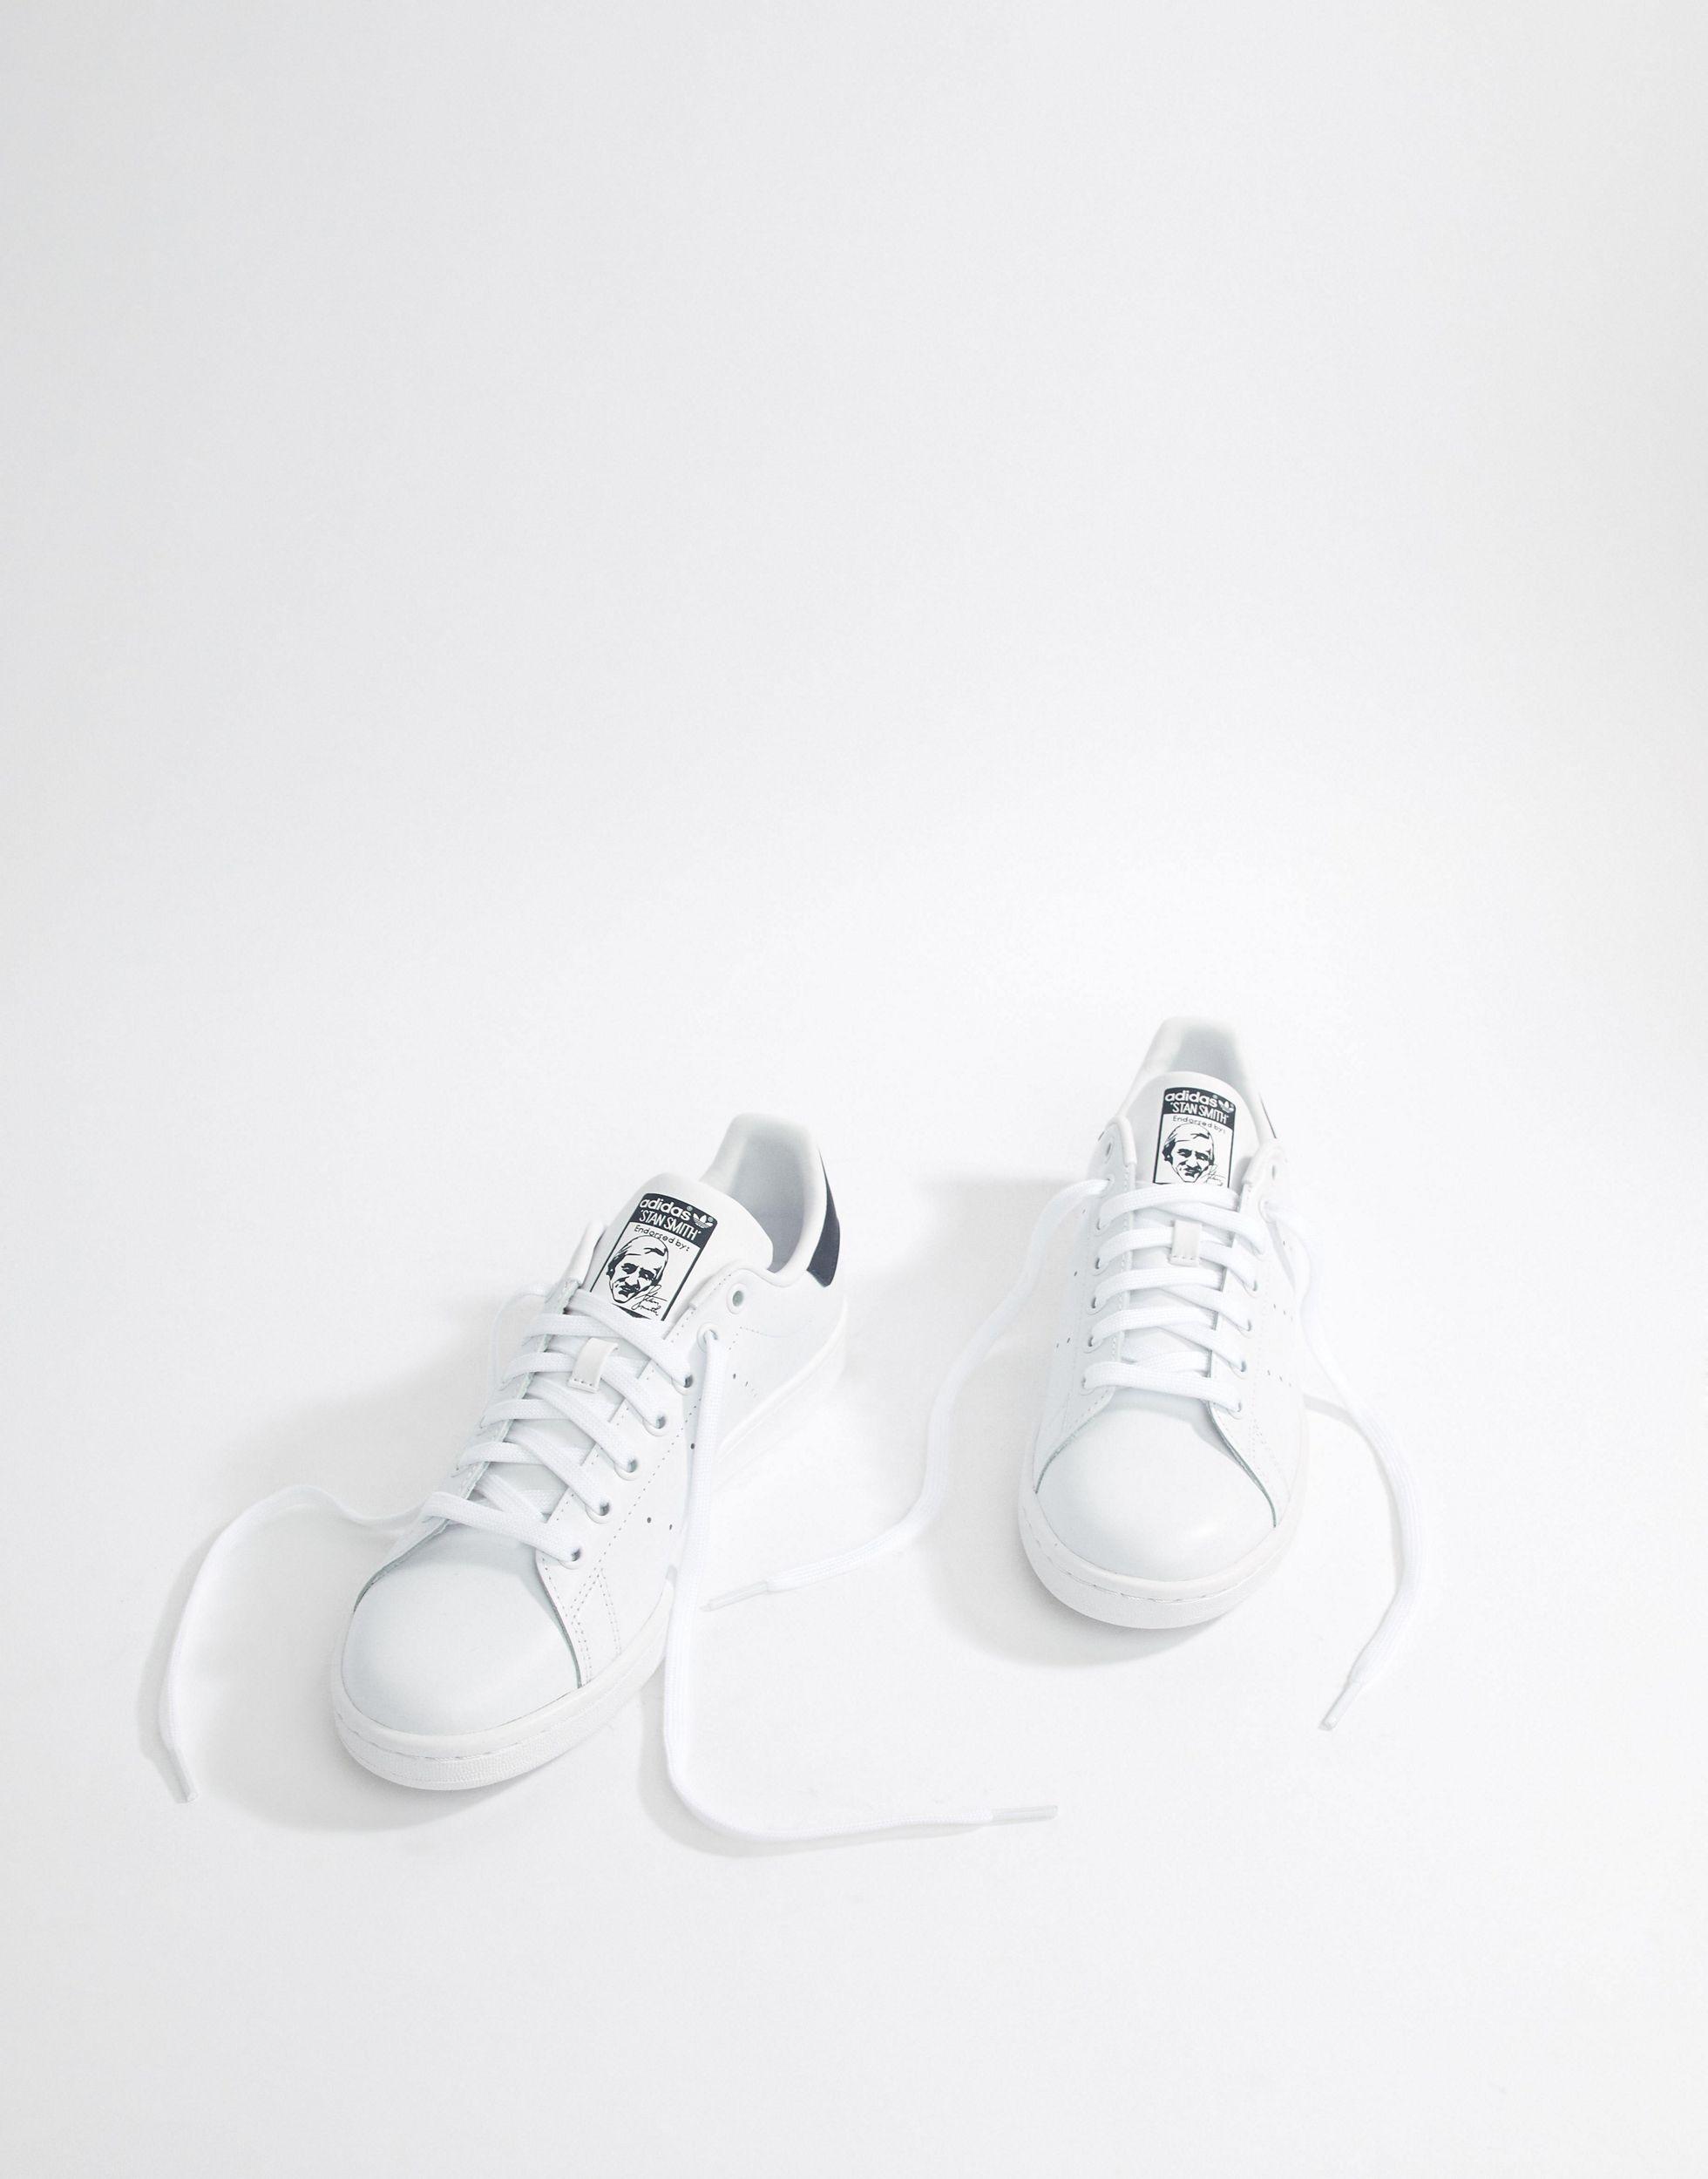 adidas originals stan smith leather sneakers in white m20325